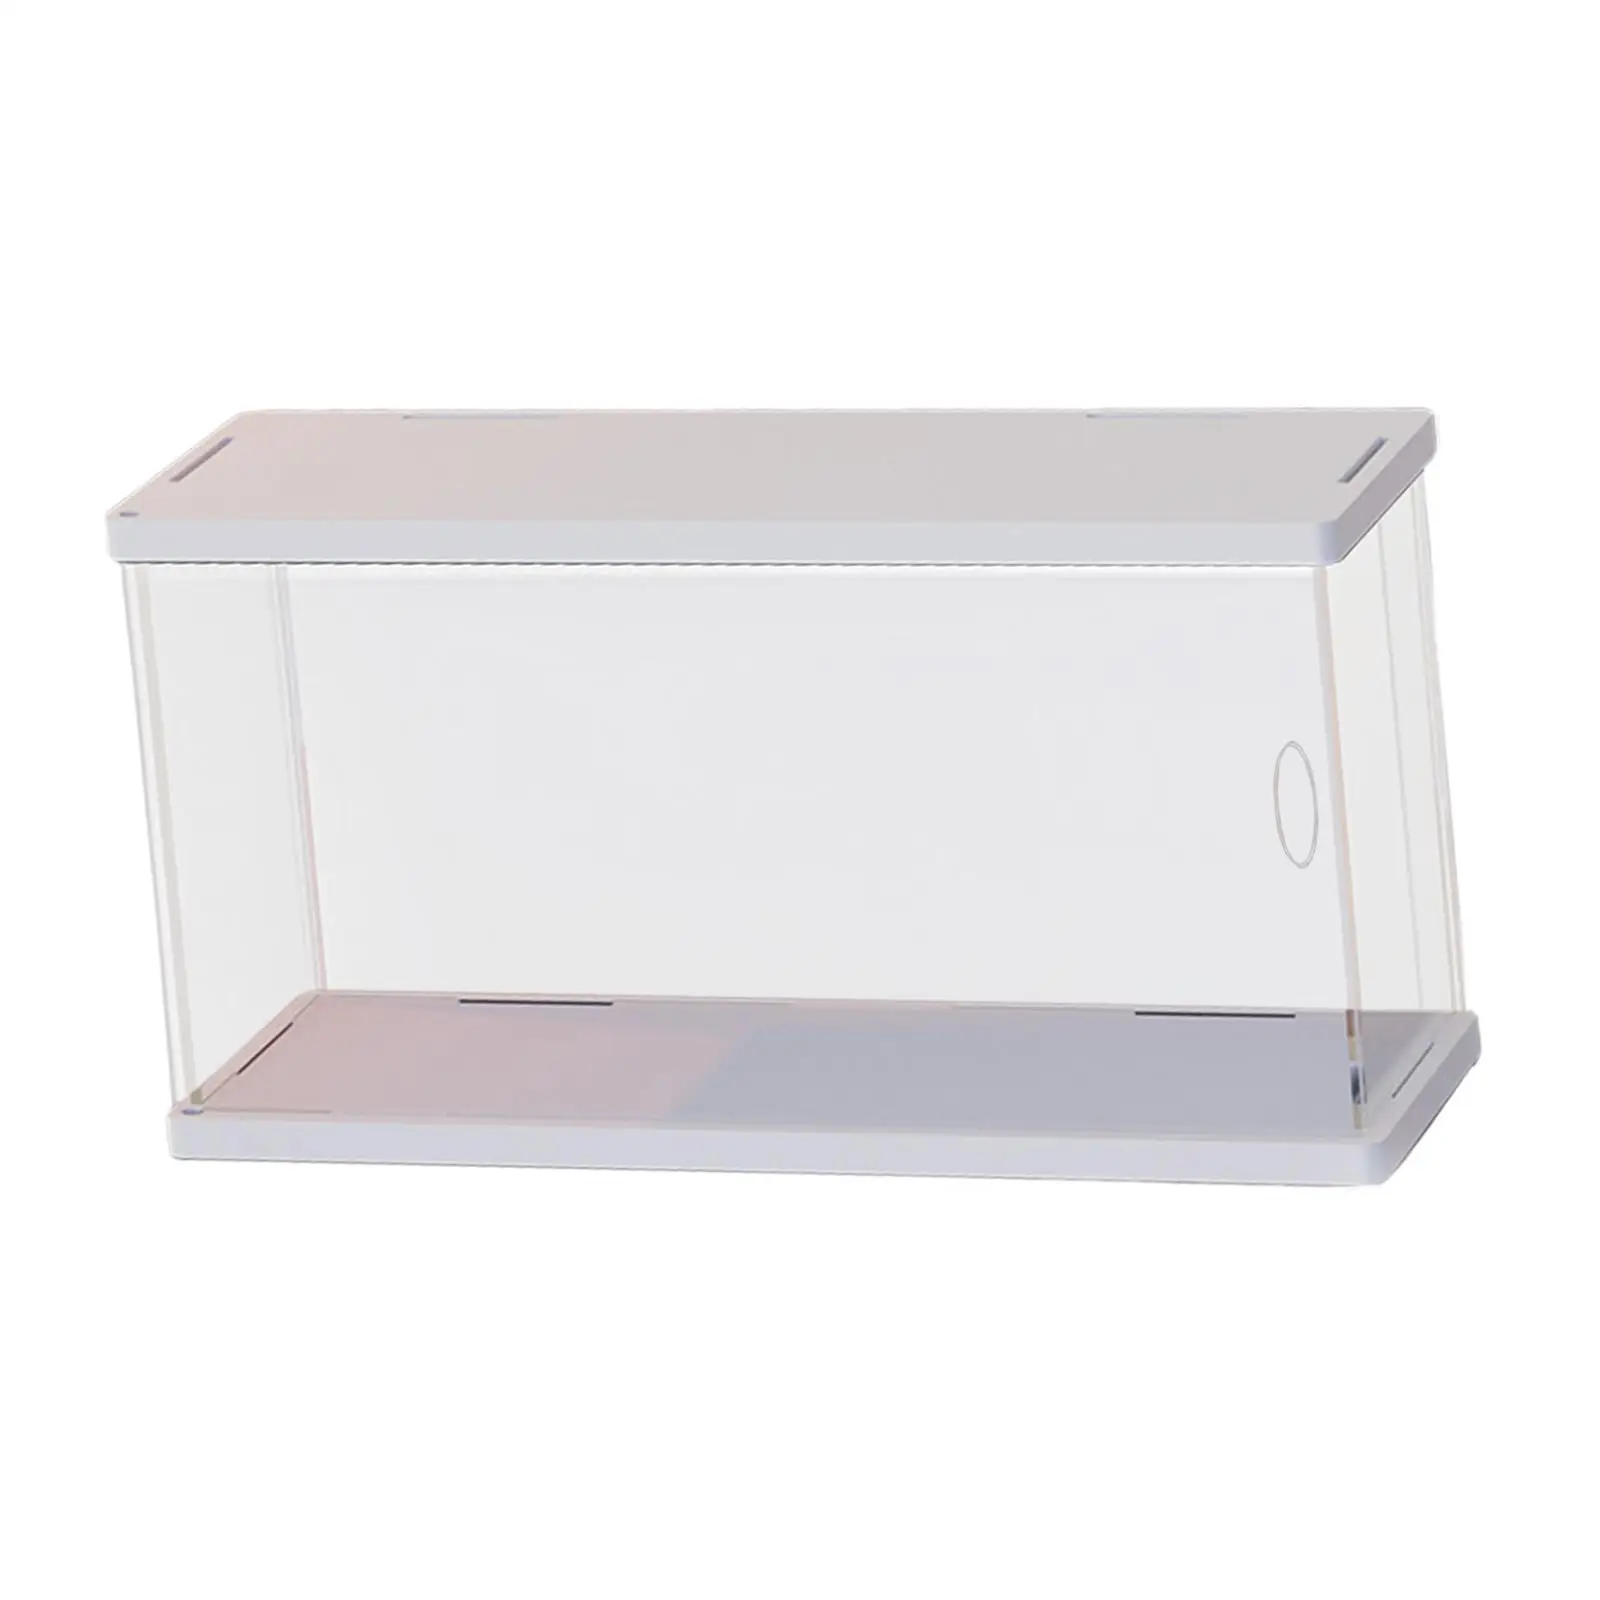 30x10x13.4cm Clear Acrylic Display Case Figurine Display Case for Figures Perfume Organizing Toys Collectibles